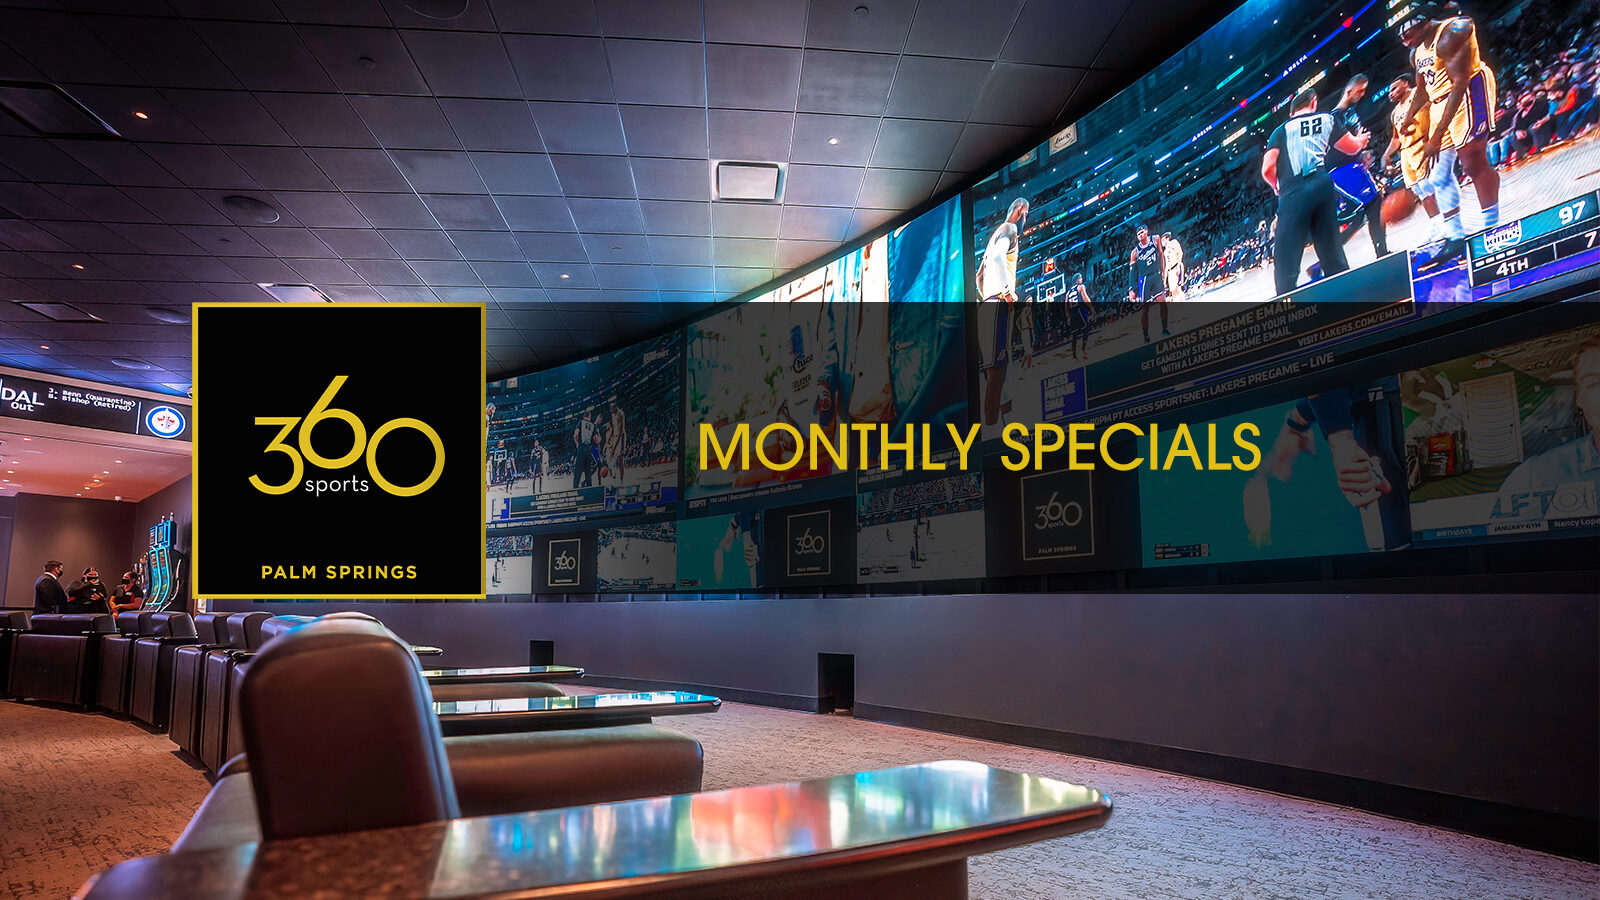 360 Sports Palm Springs Specials